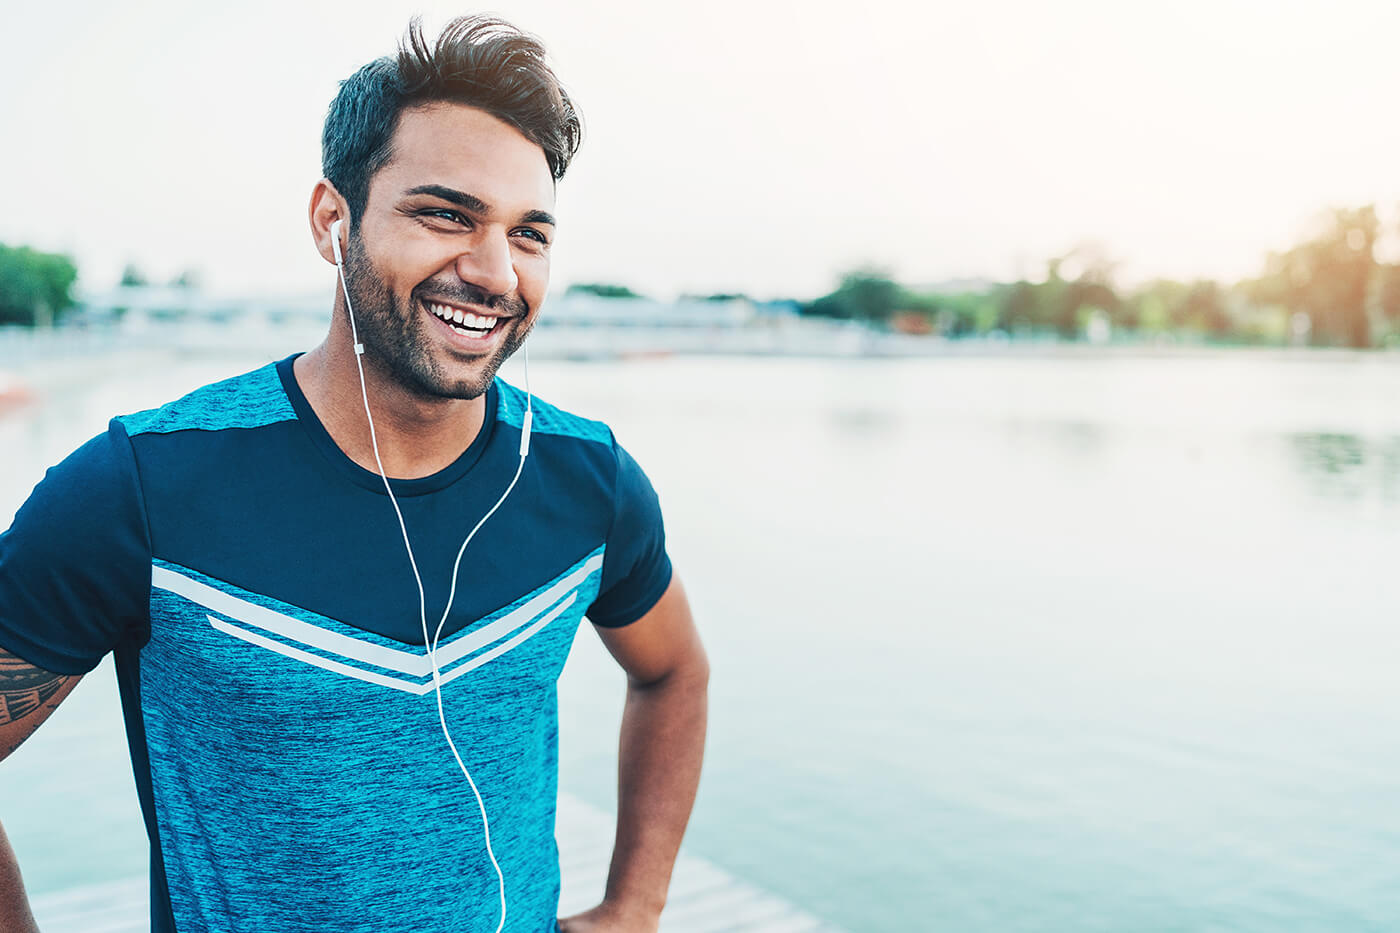 runner guy with earbuds in smiling laughing